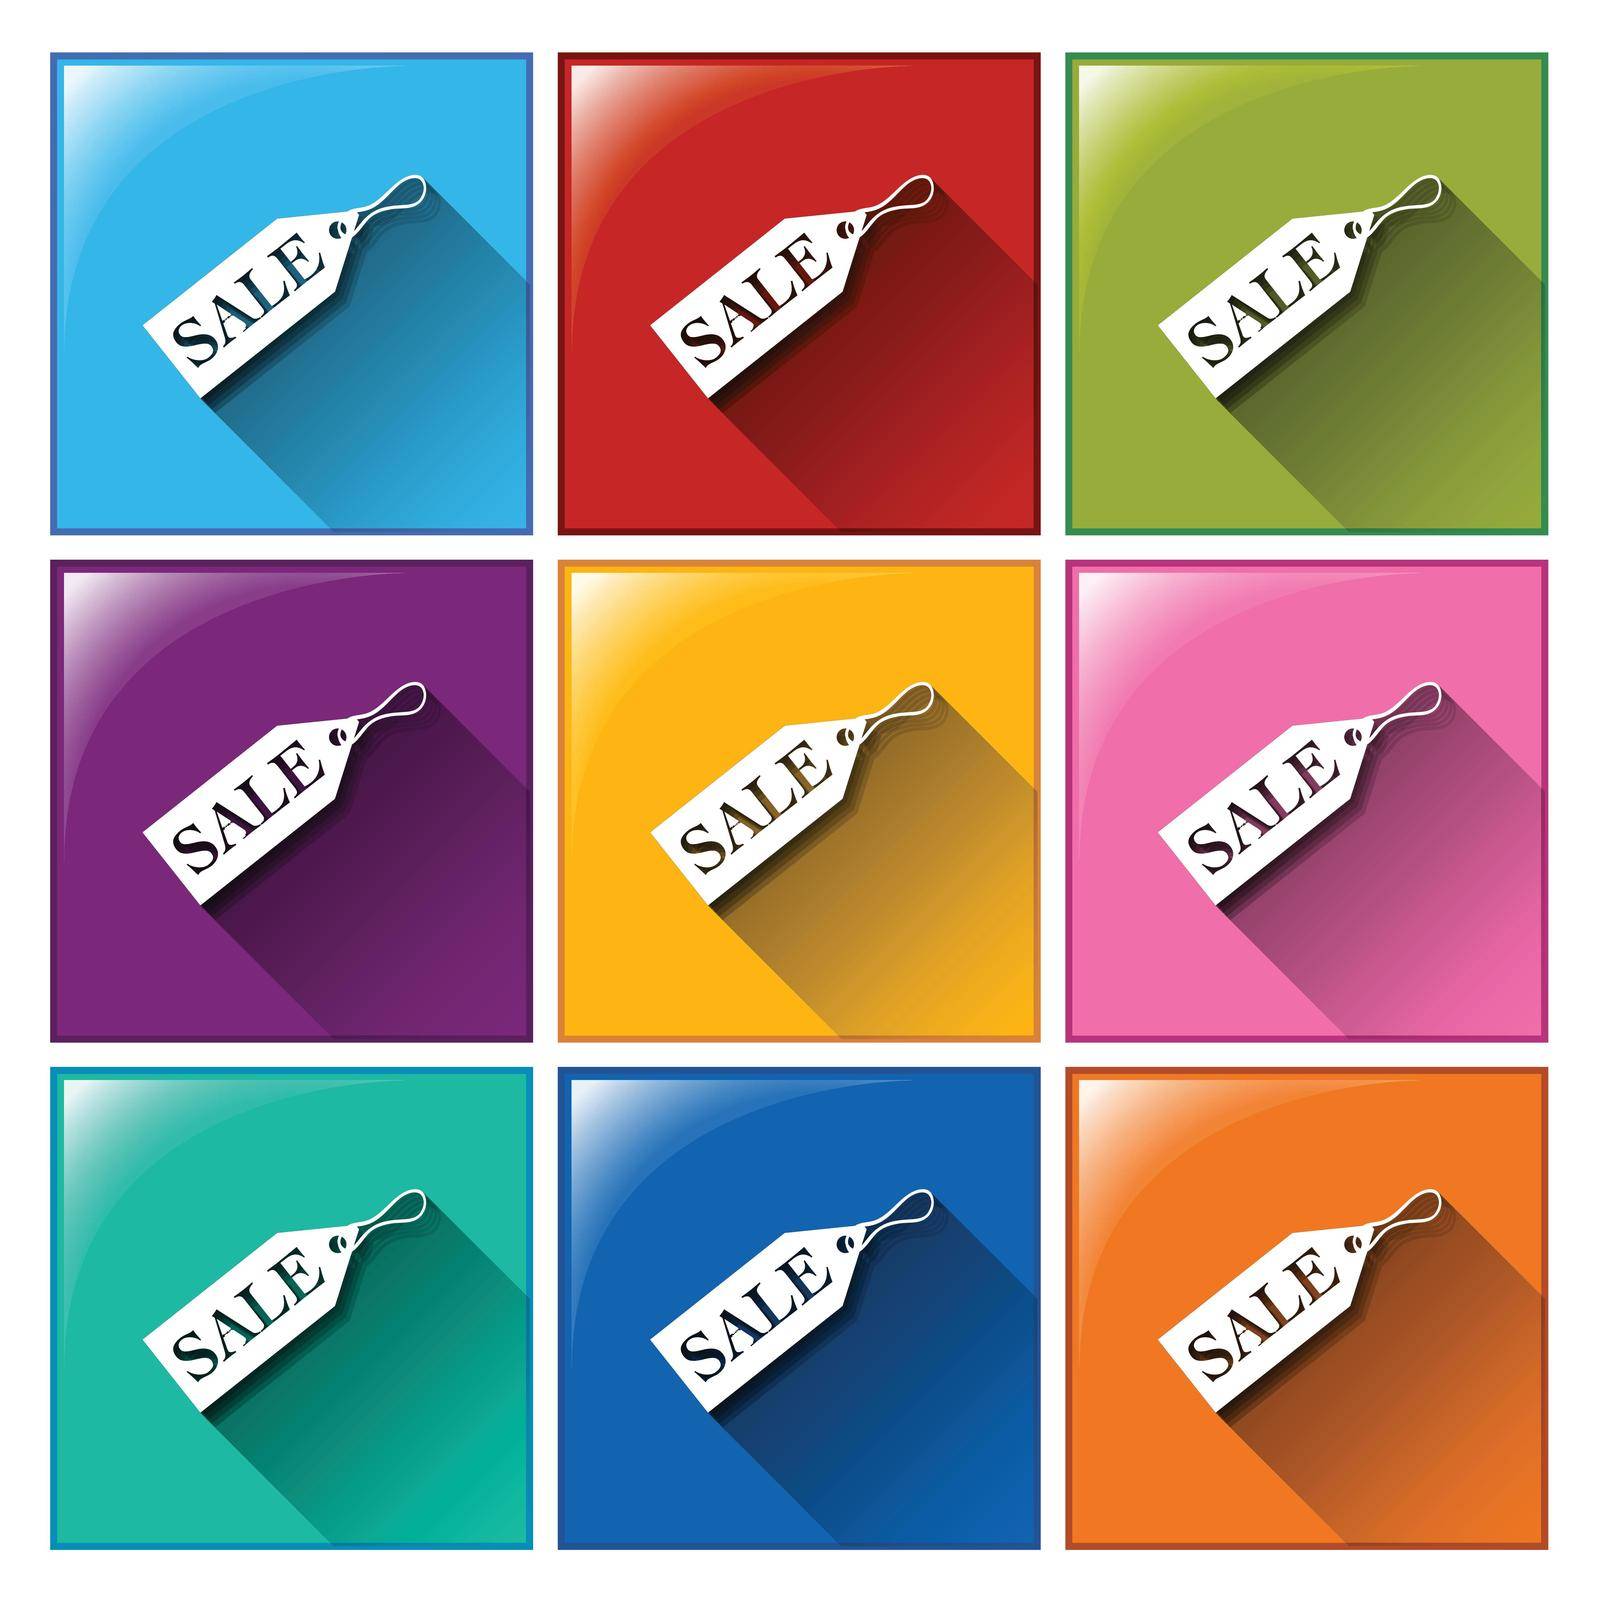 Illustration of the buttons with sale tags on a white background